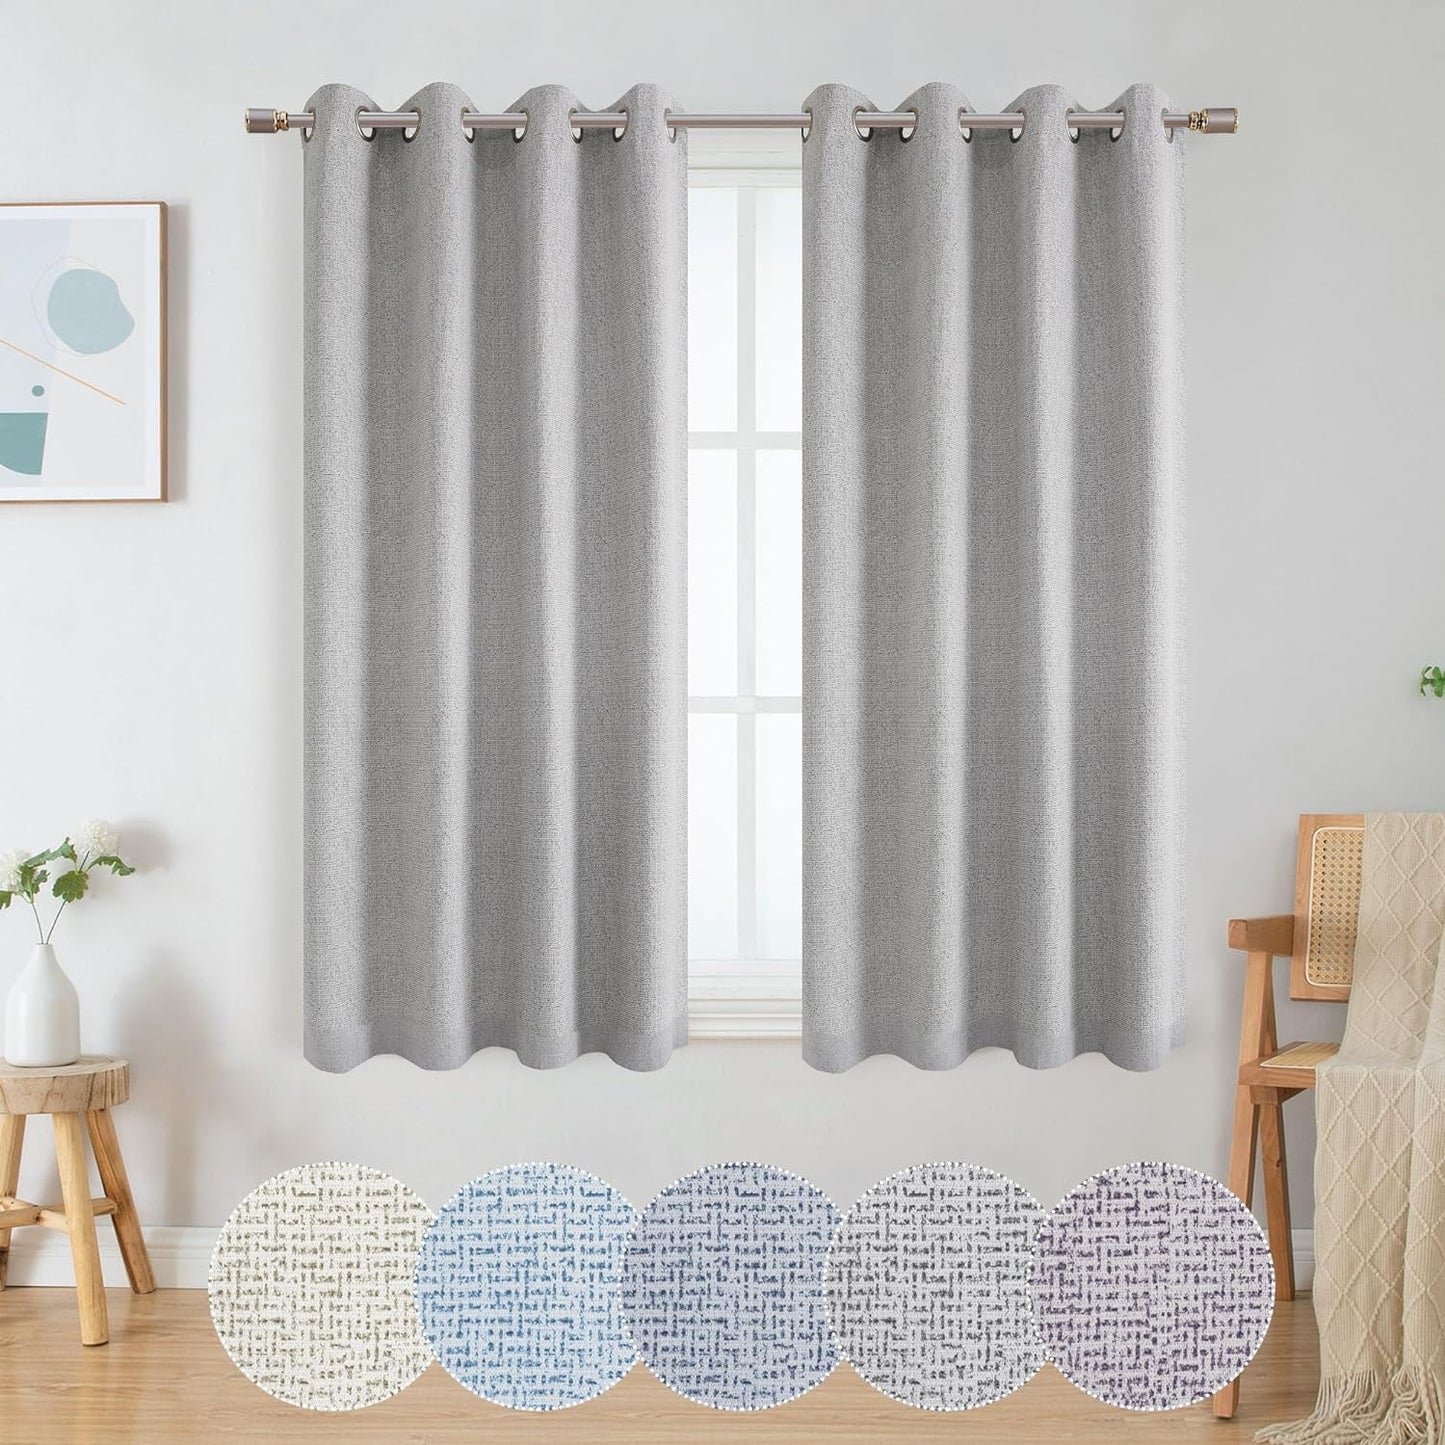 OWENIE Luke Black Out Curtains 63 Inch Long 2 Panels for Bedroom, Geometric Printed Completely Blackout Room Darkening Curtains, Grommet Thermal Insulated Living Room Curtain, 2 PCS, Each 42Wx63L Inch  OWENIE Grey 42"W X 54"L | 2 Pcs 